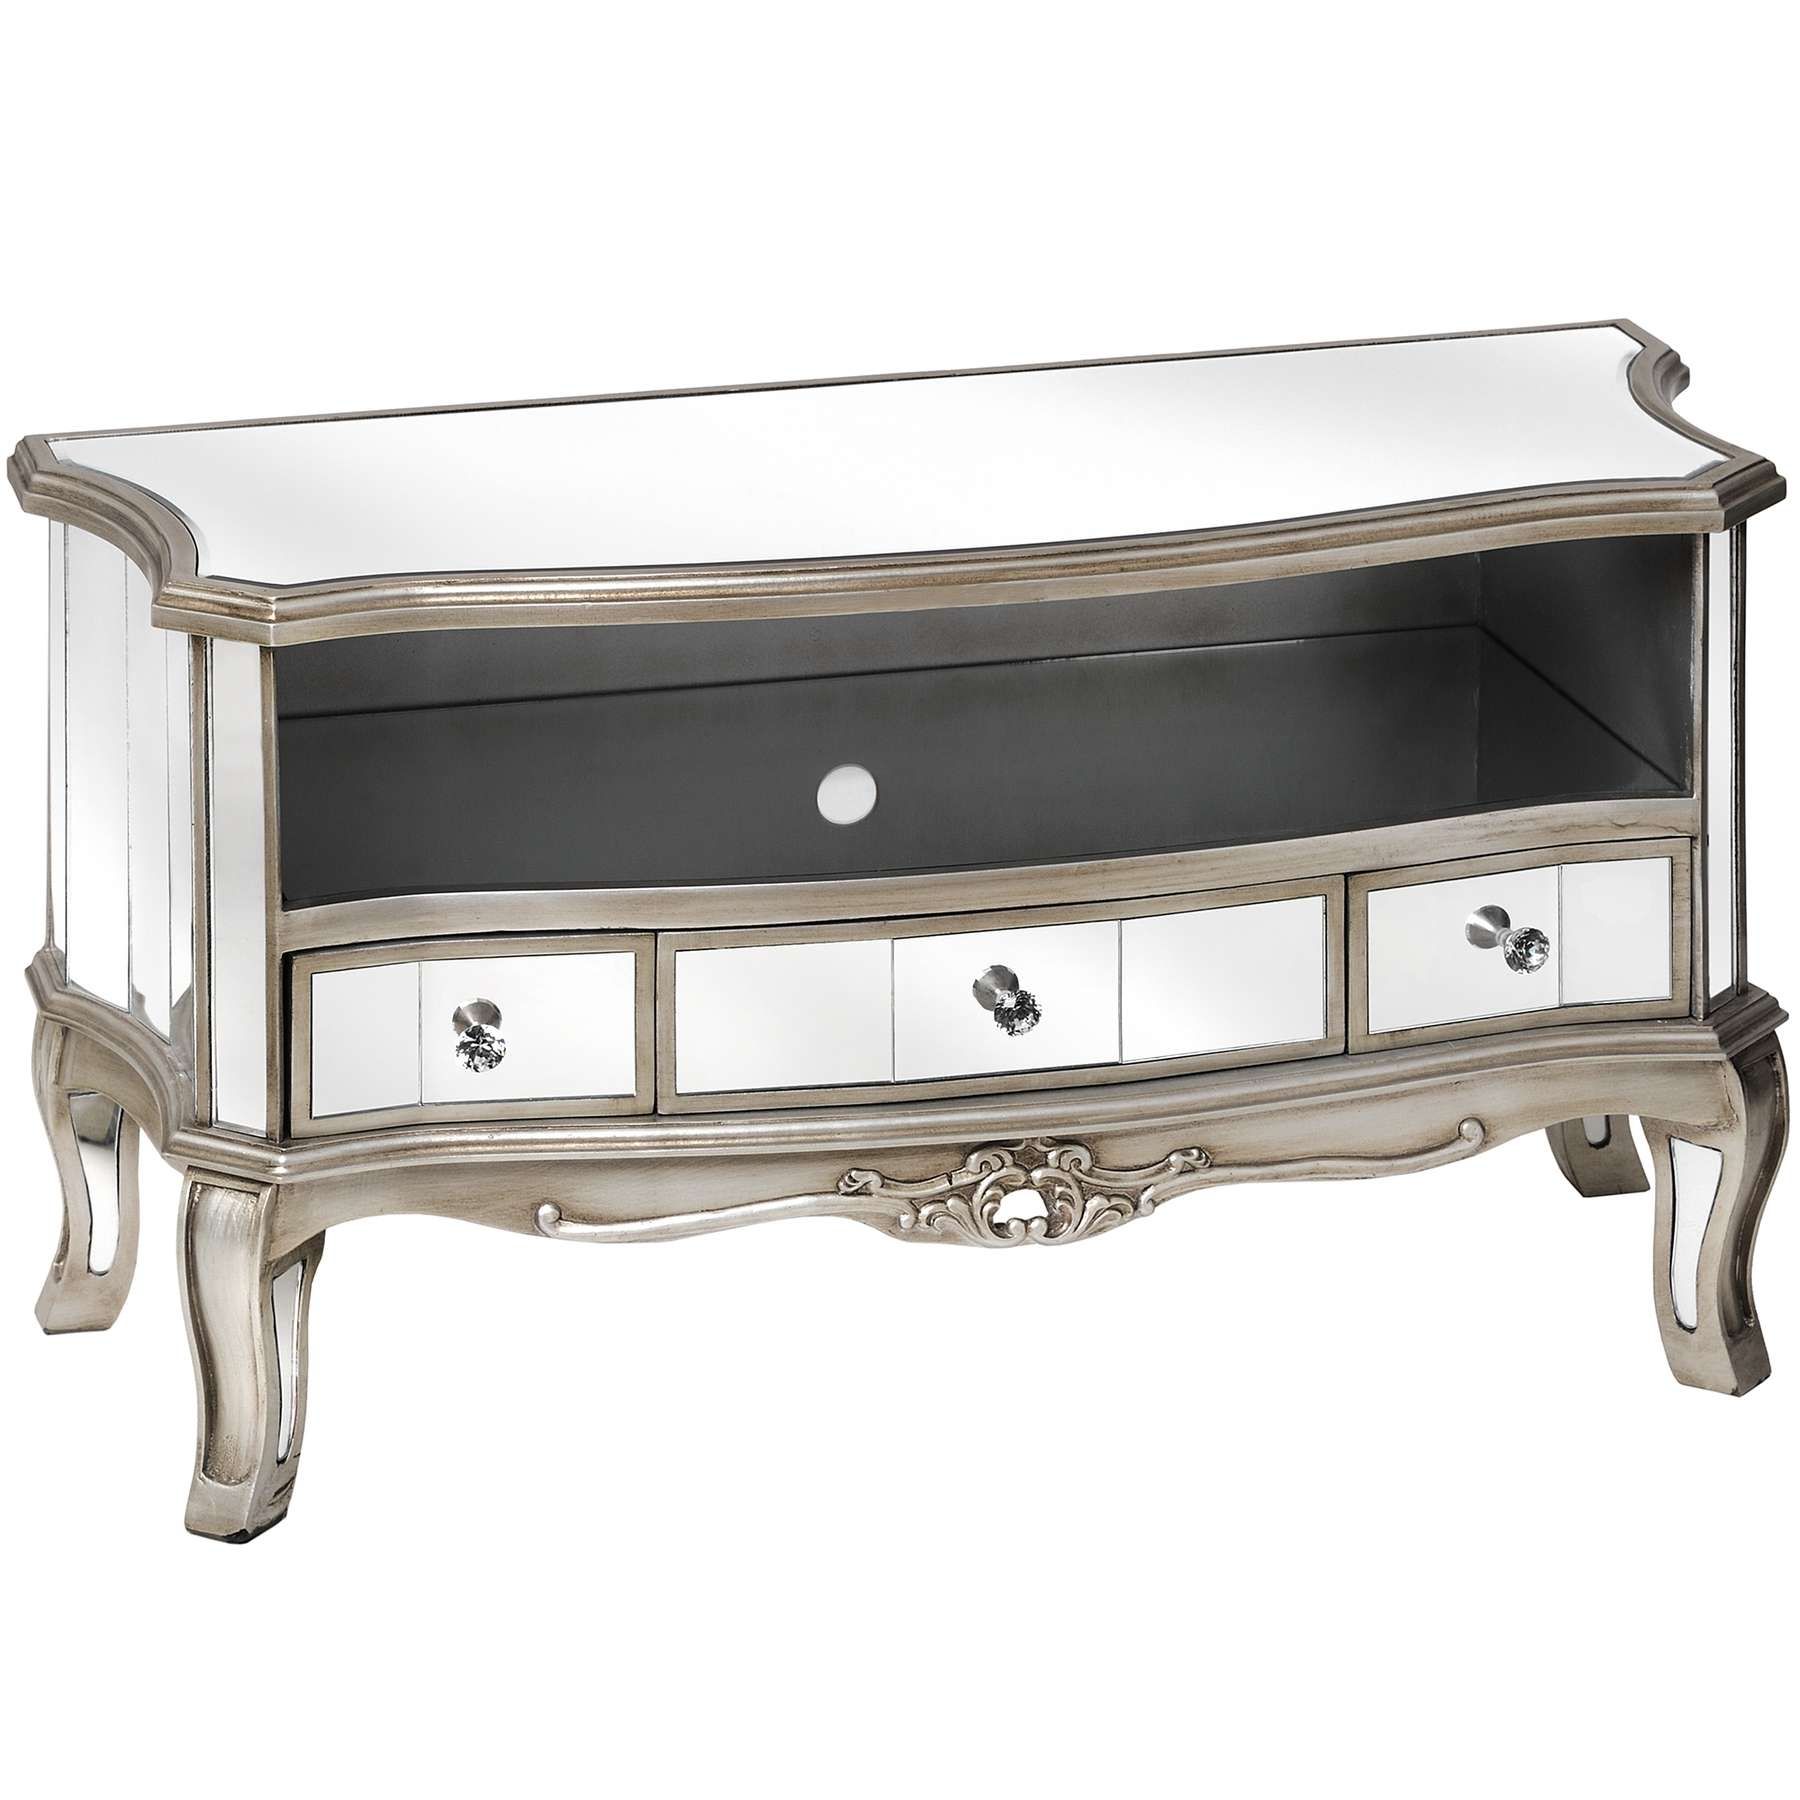 Argente Mirrored Television Cabinet From Hill Interiors Within Mirrored Tv Cabinets Furniture (View 15 of 20)